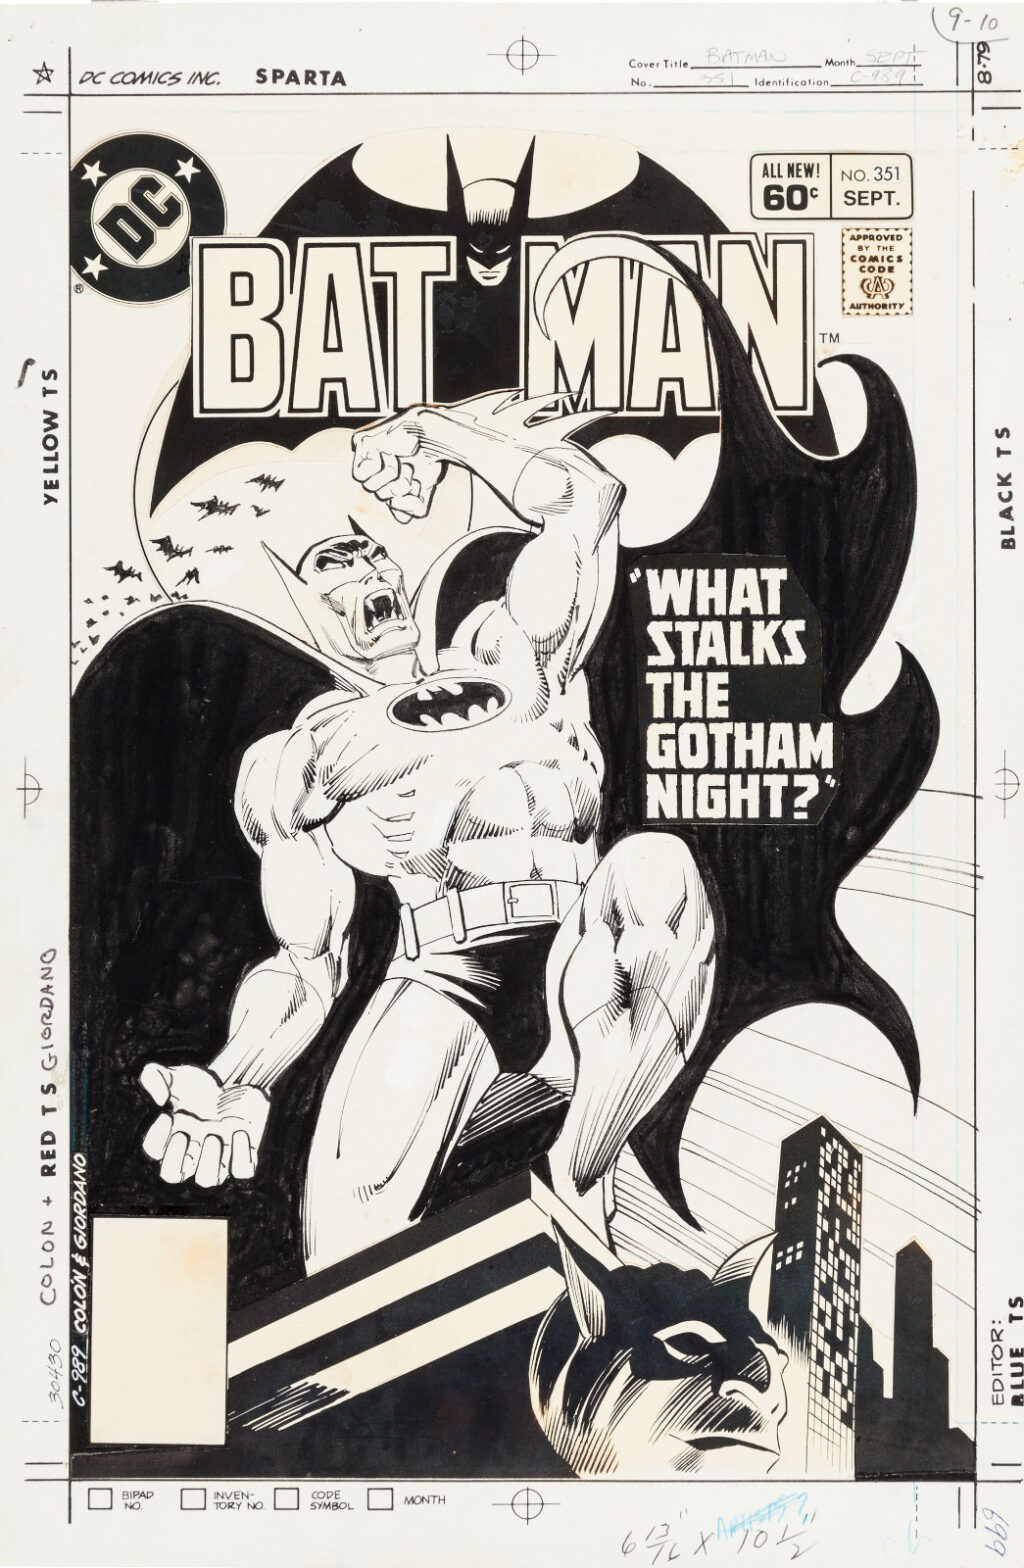 Batman issue 351 cover by Ernie Colon and Dick Giordano